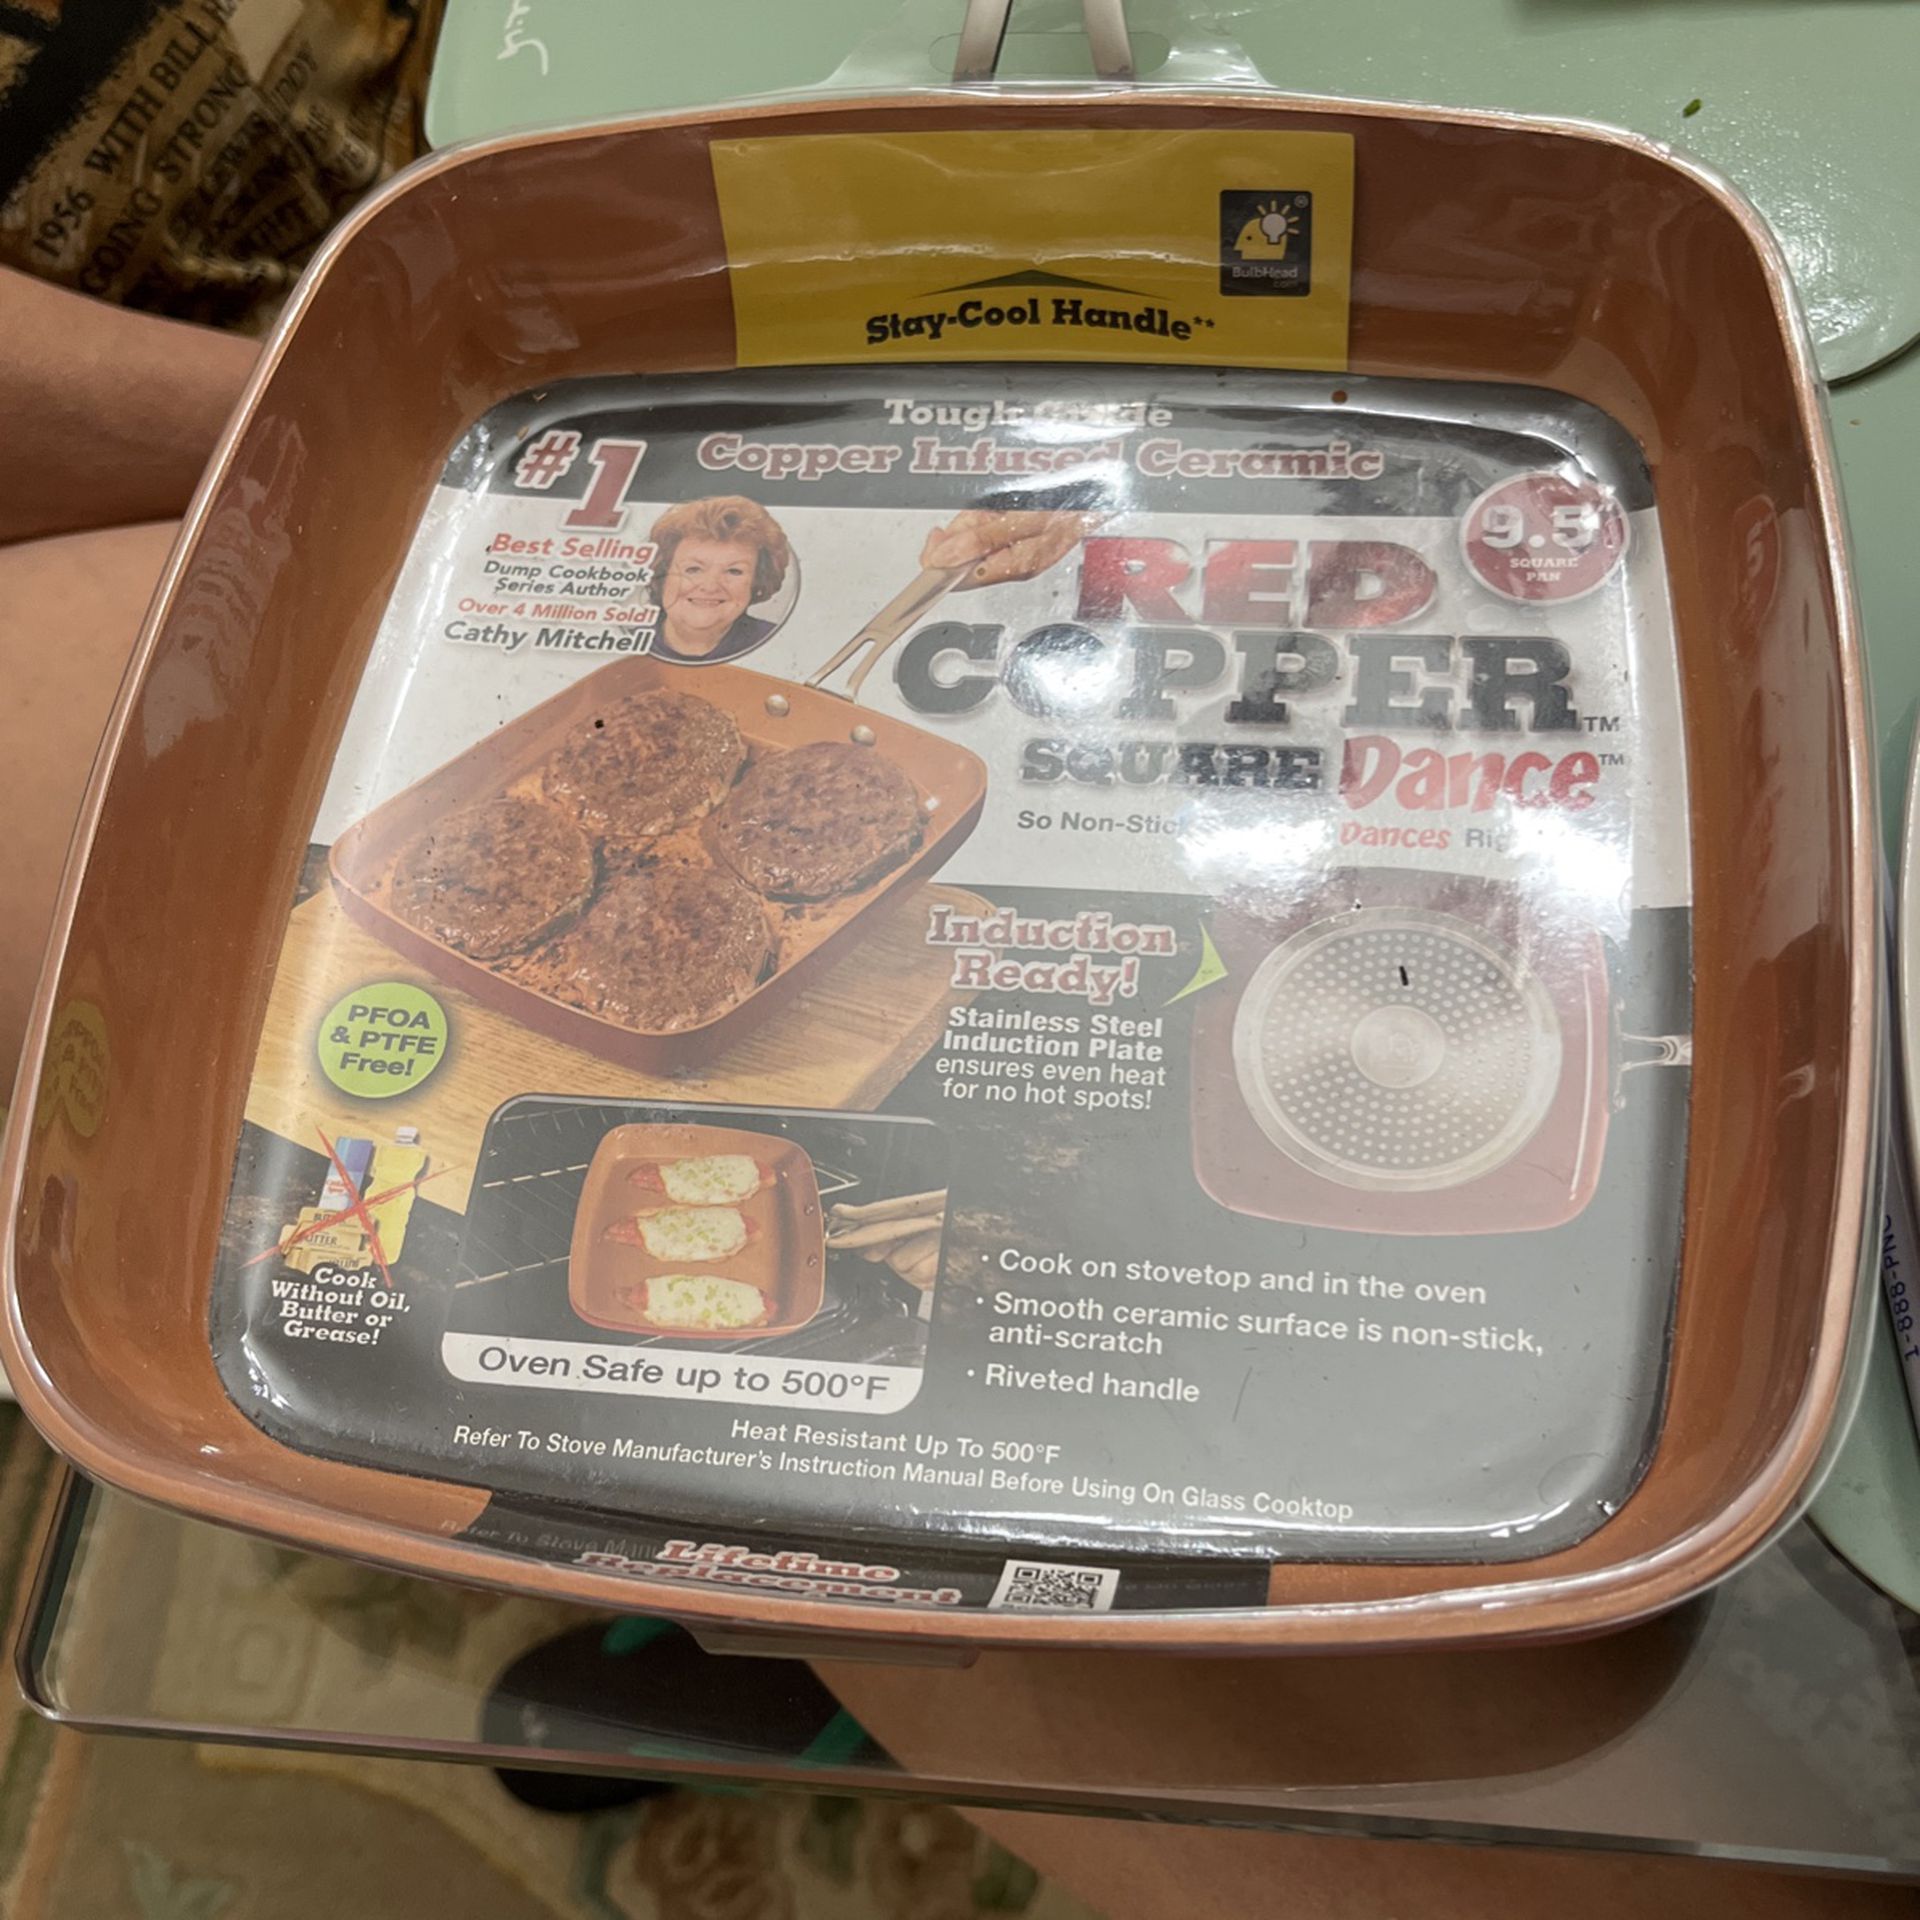 GREAT PRICE! Red Copper 9.5” Square Copper Frying Pan Cookware Nonstick Fry Skillet $29.99 New My Price Only $14 Firm